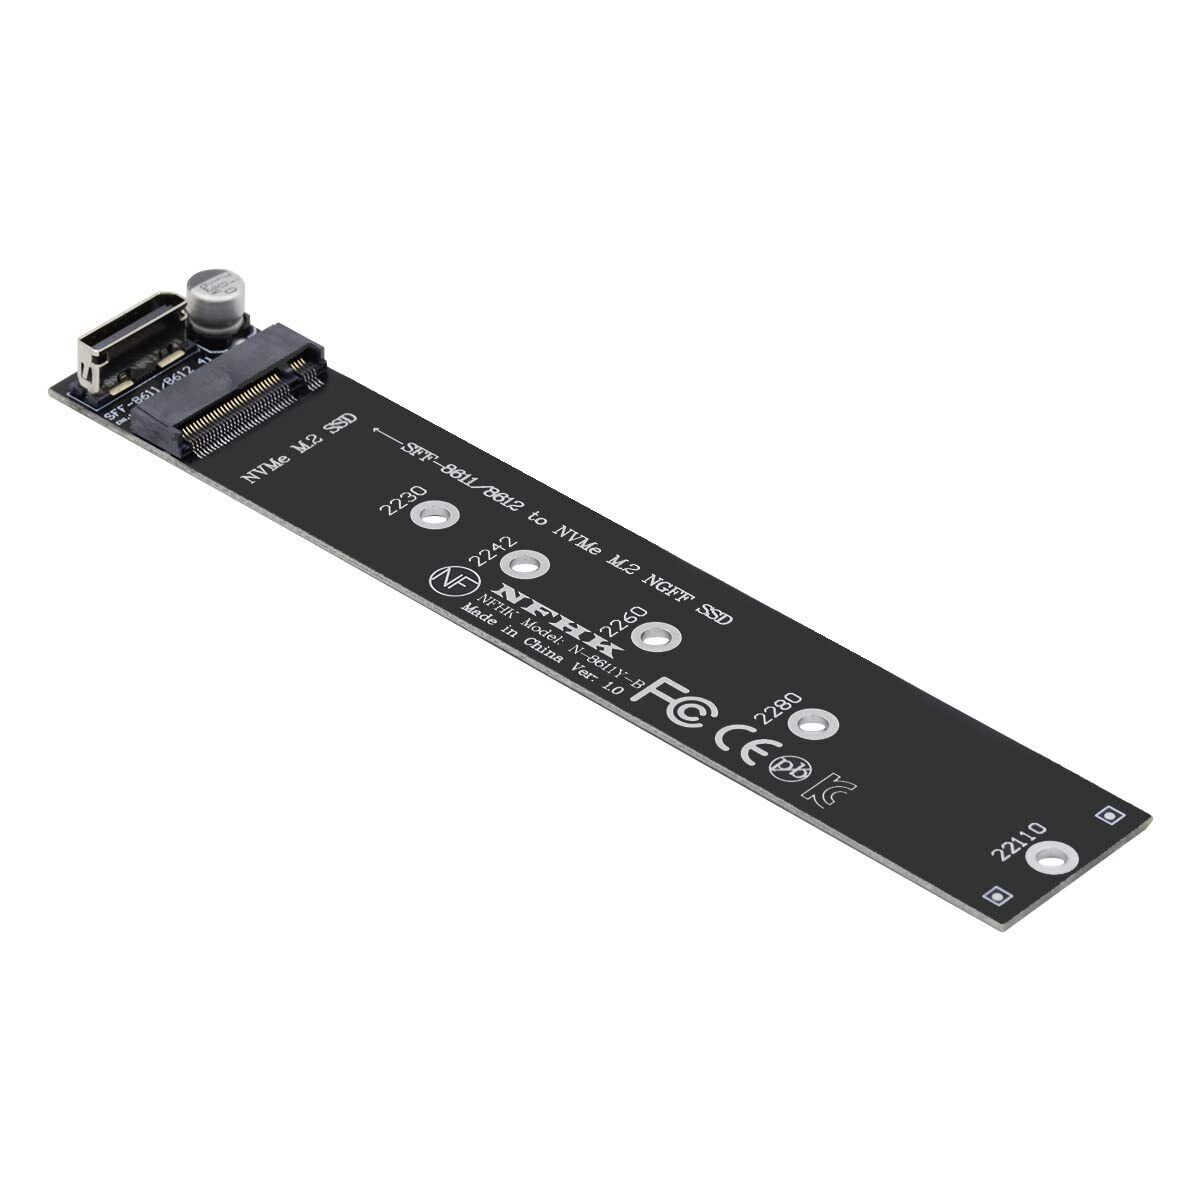 Cablecc Oculink SFF-8612 SFF-8611 to M.2 Kit NGFF M-Key to NVME PCIe SSD 2280...